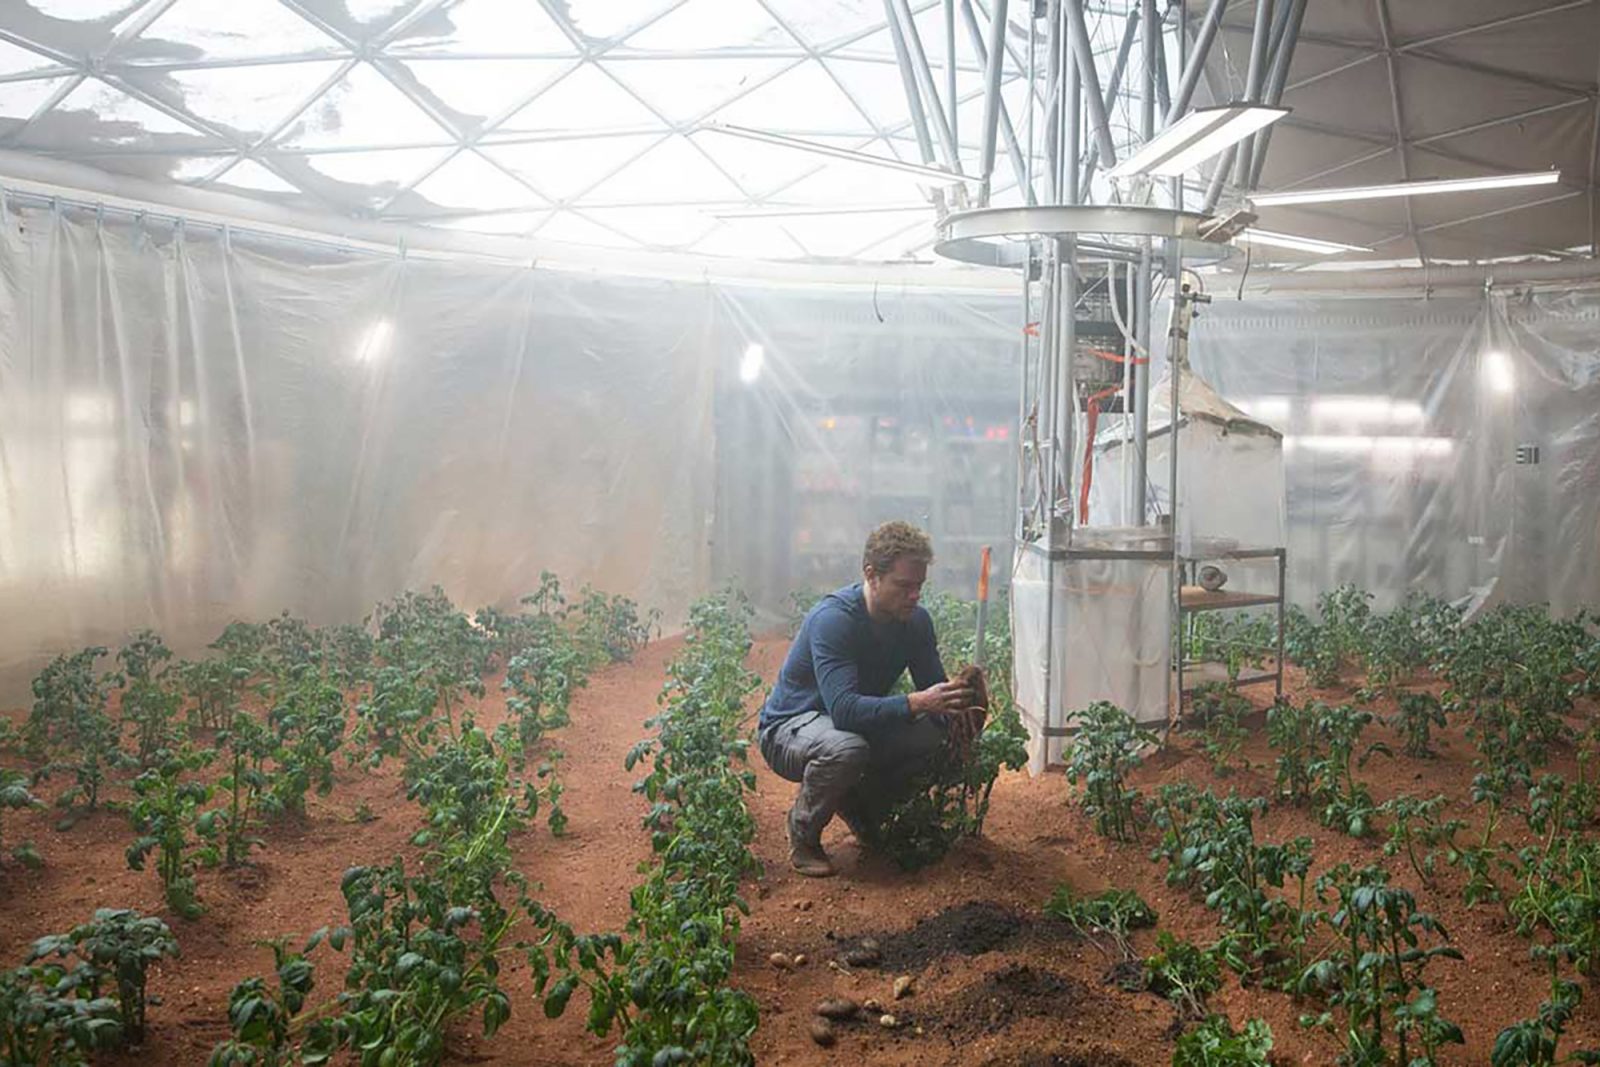 🚀 How Long Would You Survive on Mars? Growing Food On Mars2